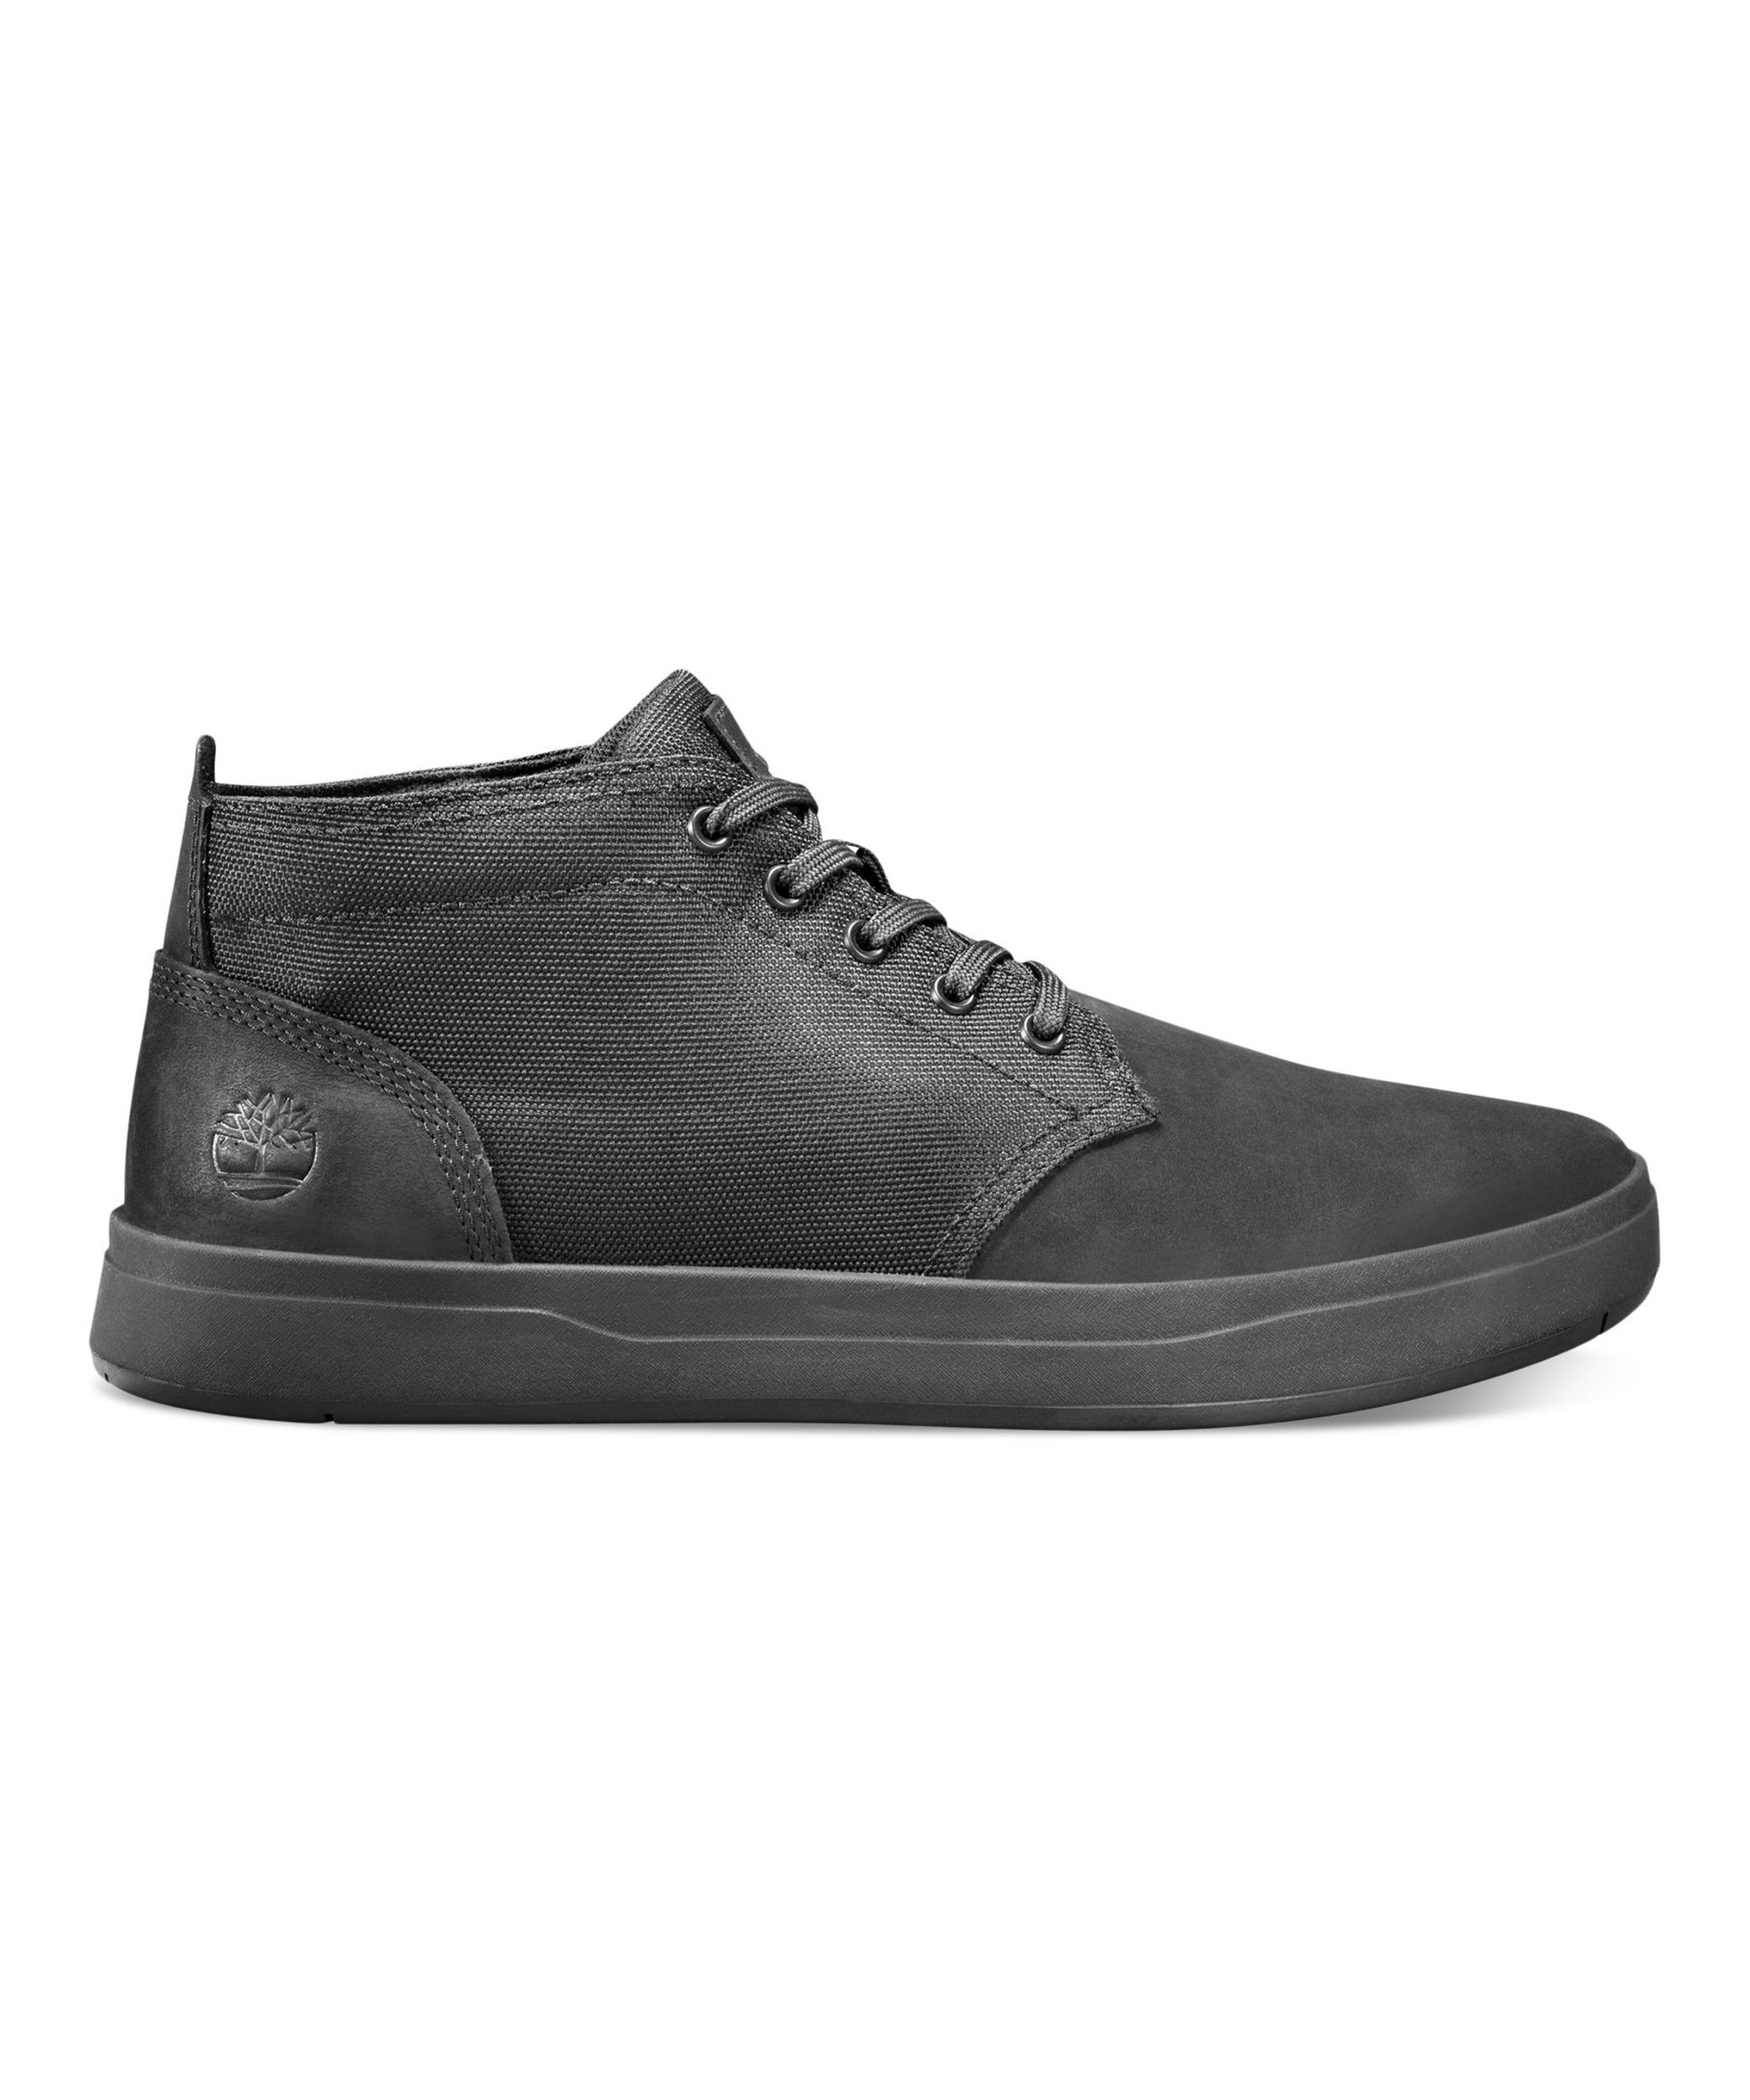 Timberland Men's Davis Square Leather and Fabric Chukka Boots | Marks